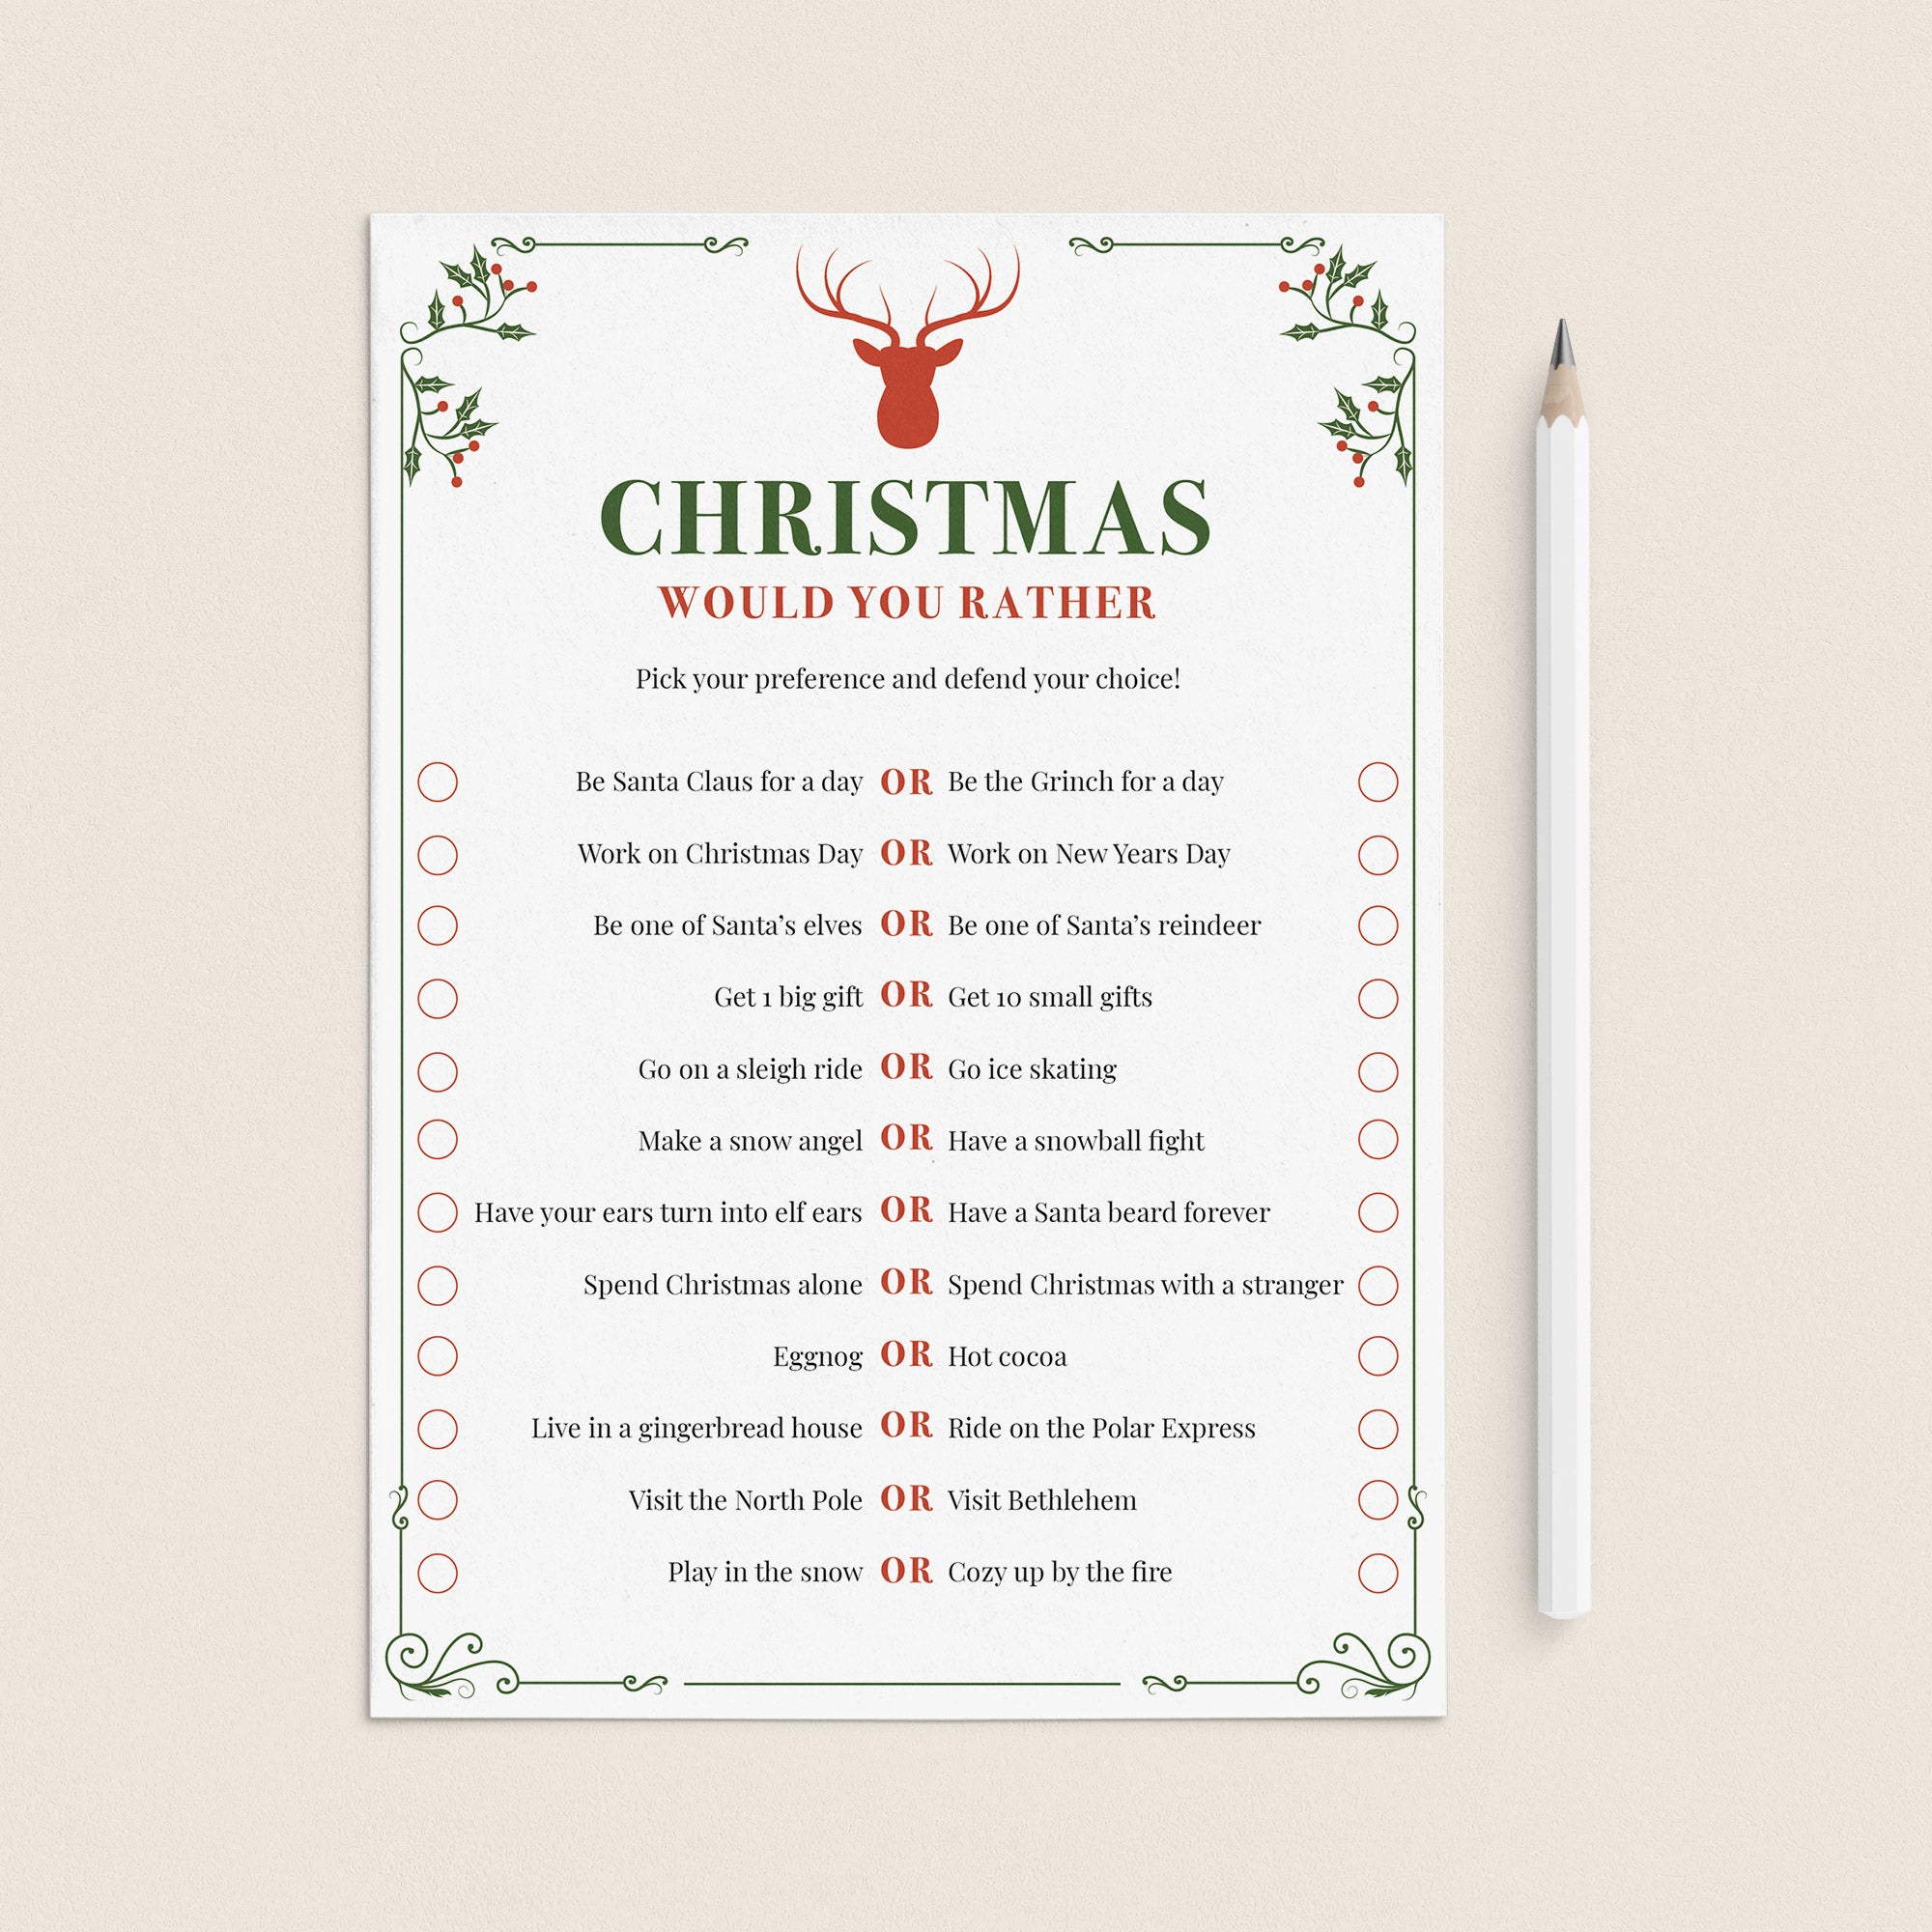 Christmas Would You Rather Questions  Christmas trivia, Fun christmas  party games, Fun christmas games